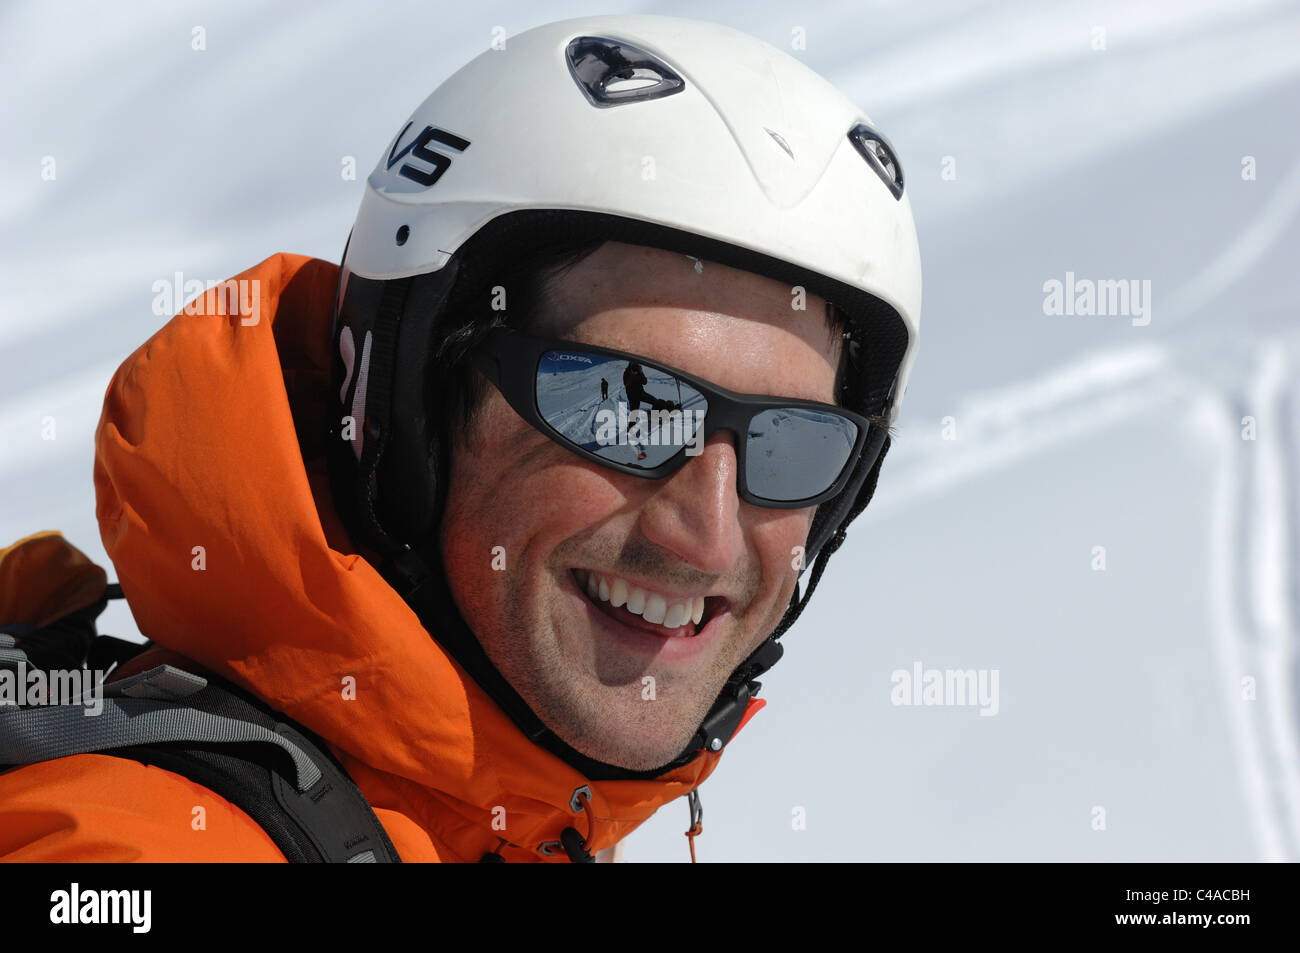 A close up of a happy male skier smiling wearing a orange jacket  helmet and sunglasses on a clear sunny day Stock Photo